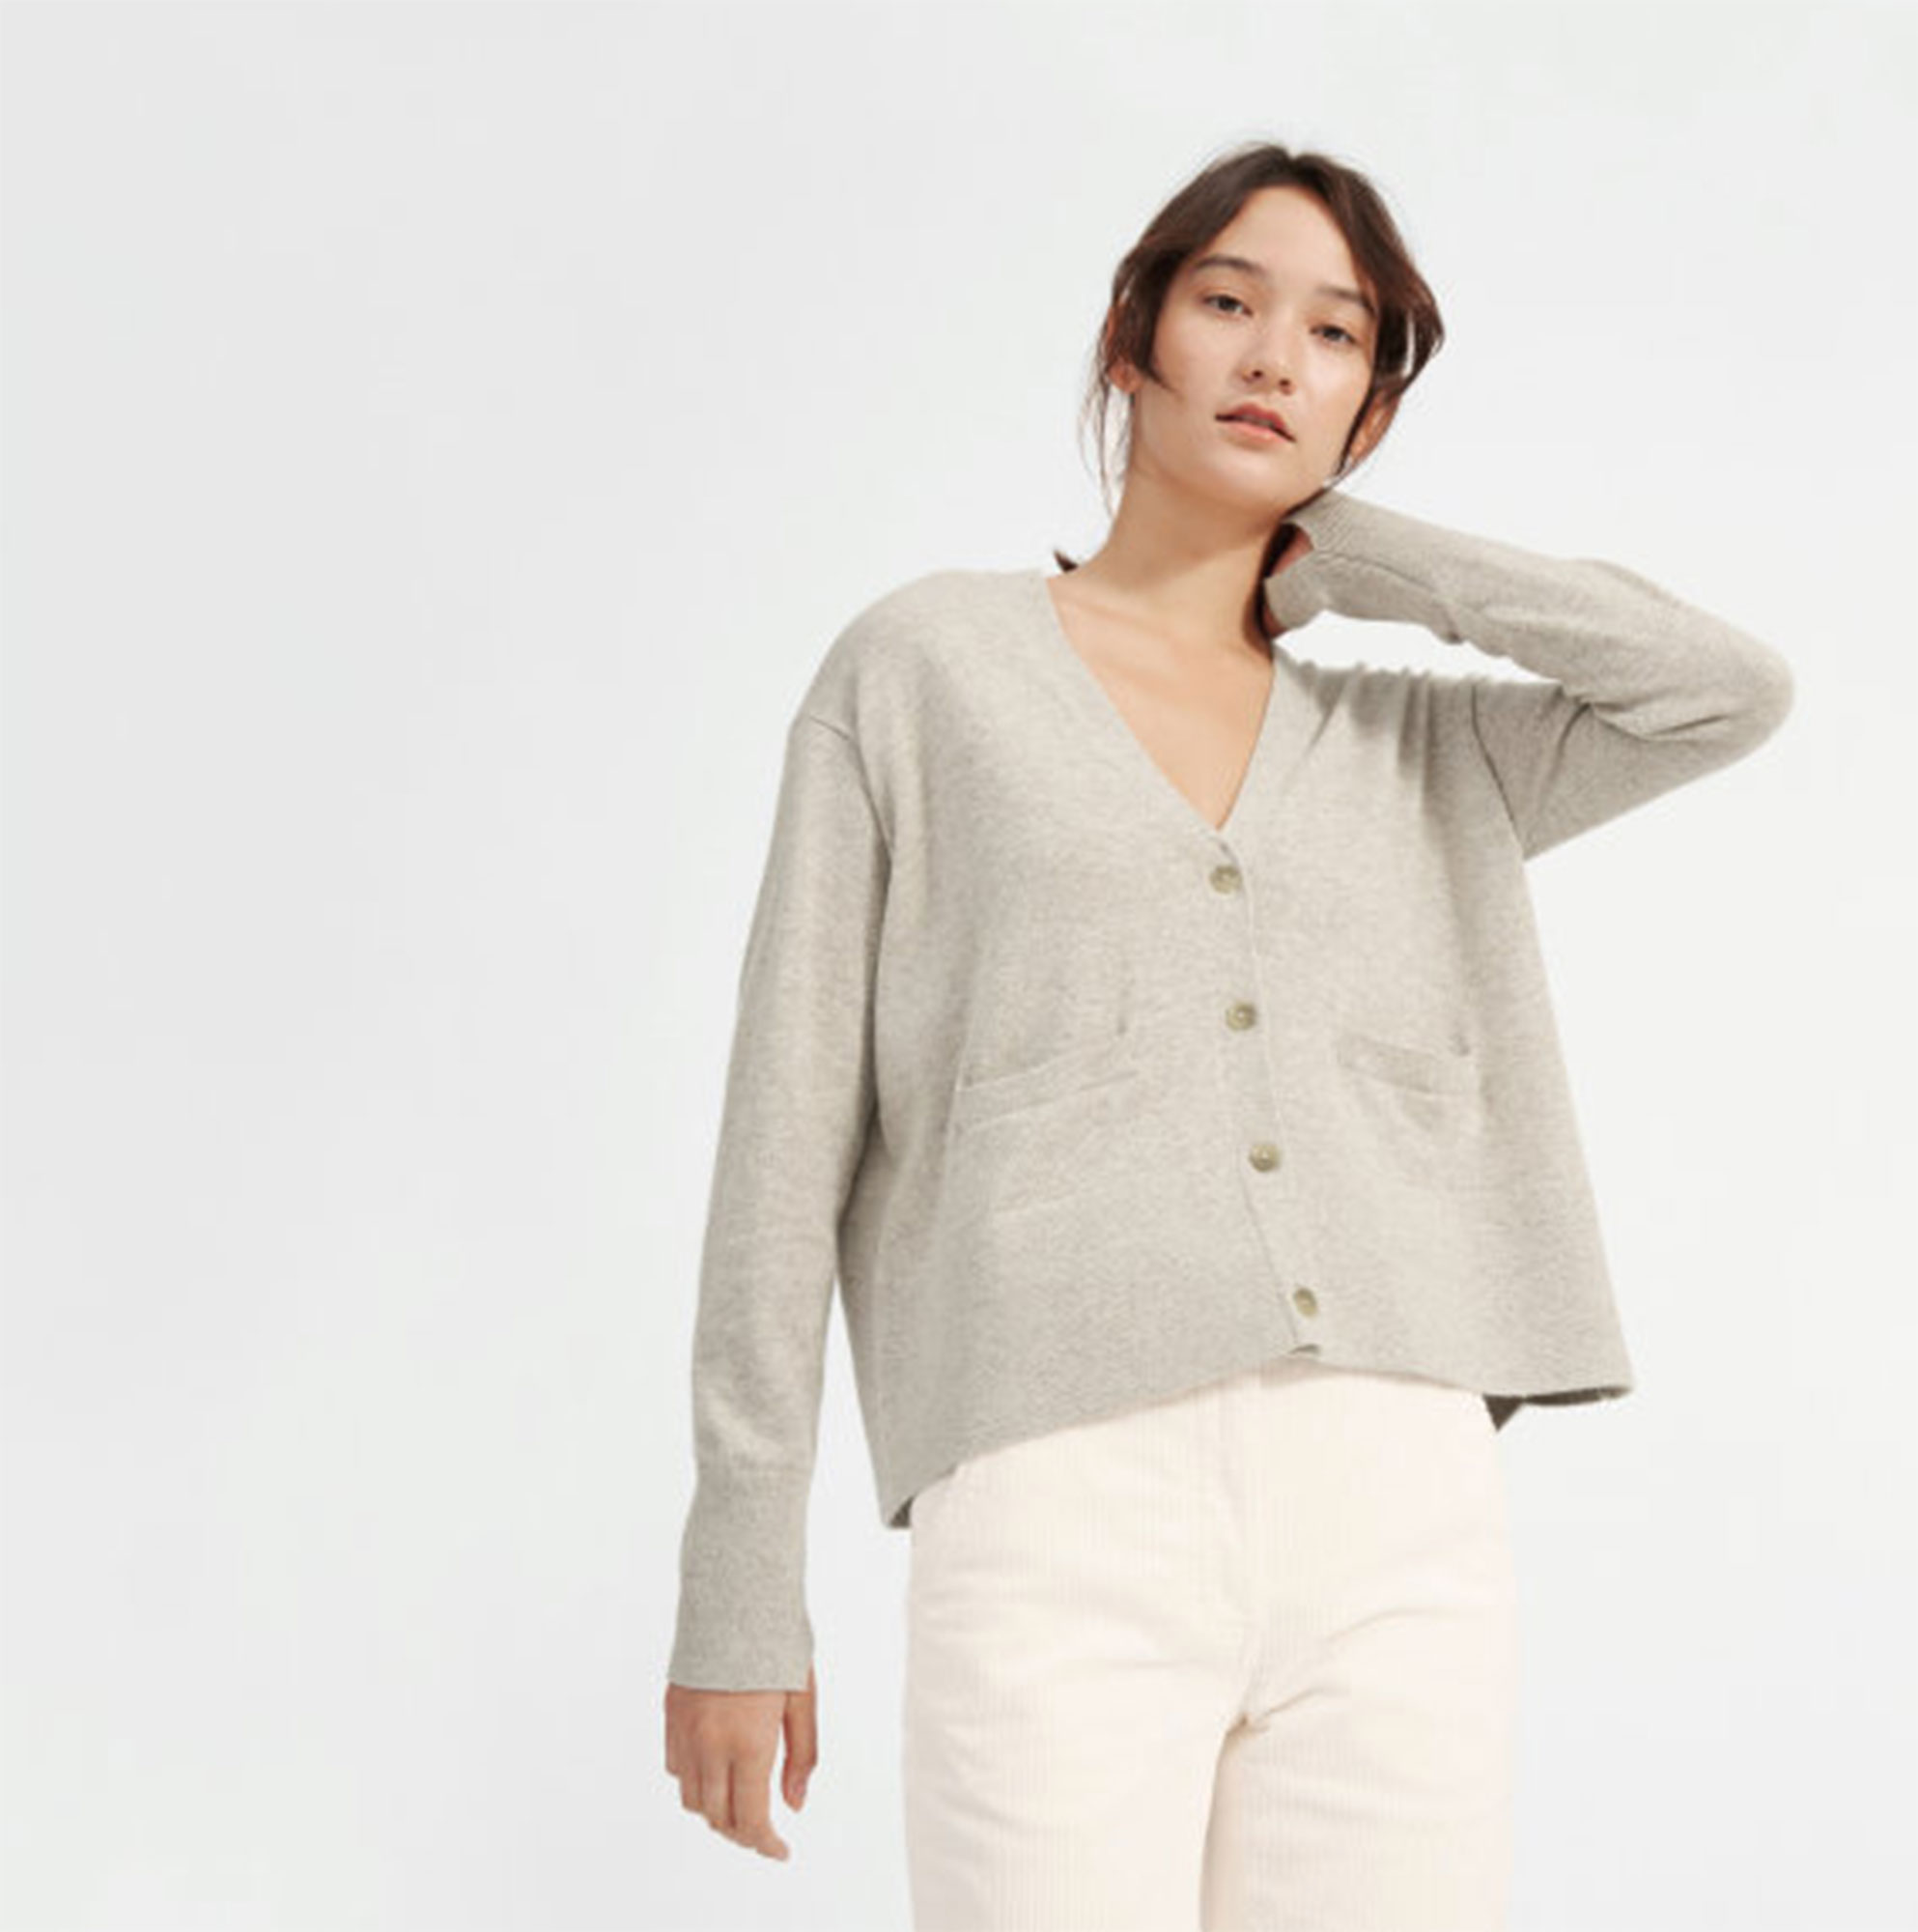 Cropped Cardigan Sweaters Inspired by Kendall Jenner: Shop